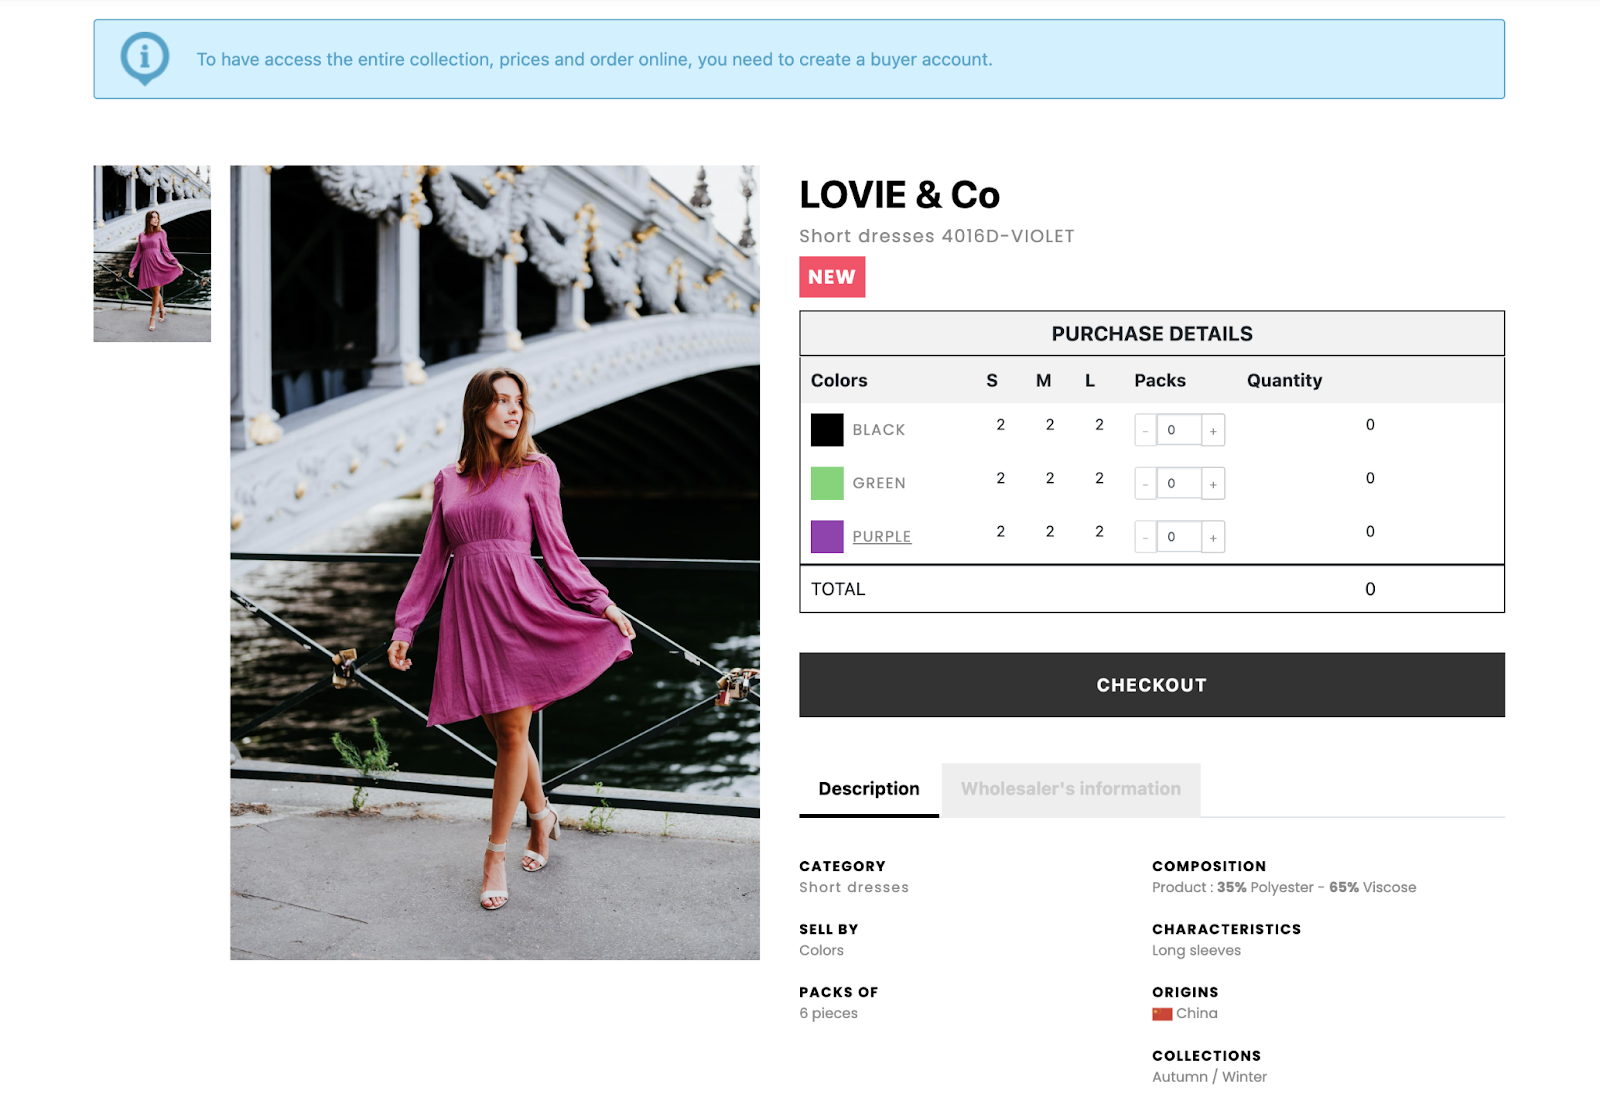 An eFashion Paris product page with an image on the left and quantity information on the right